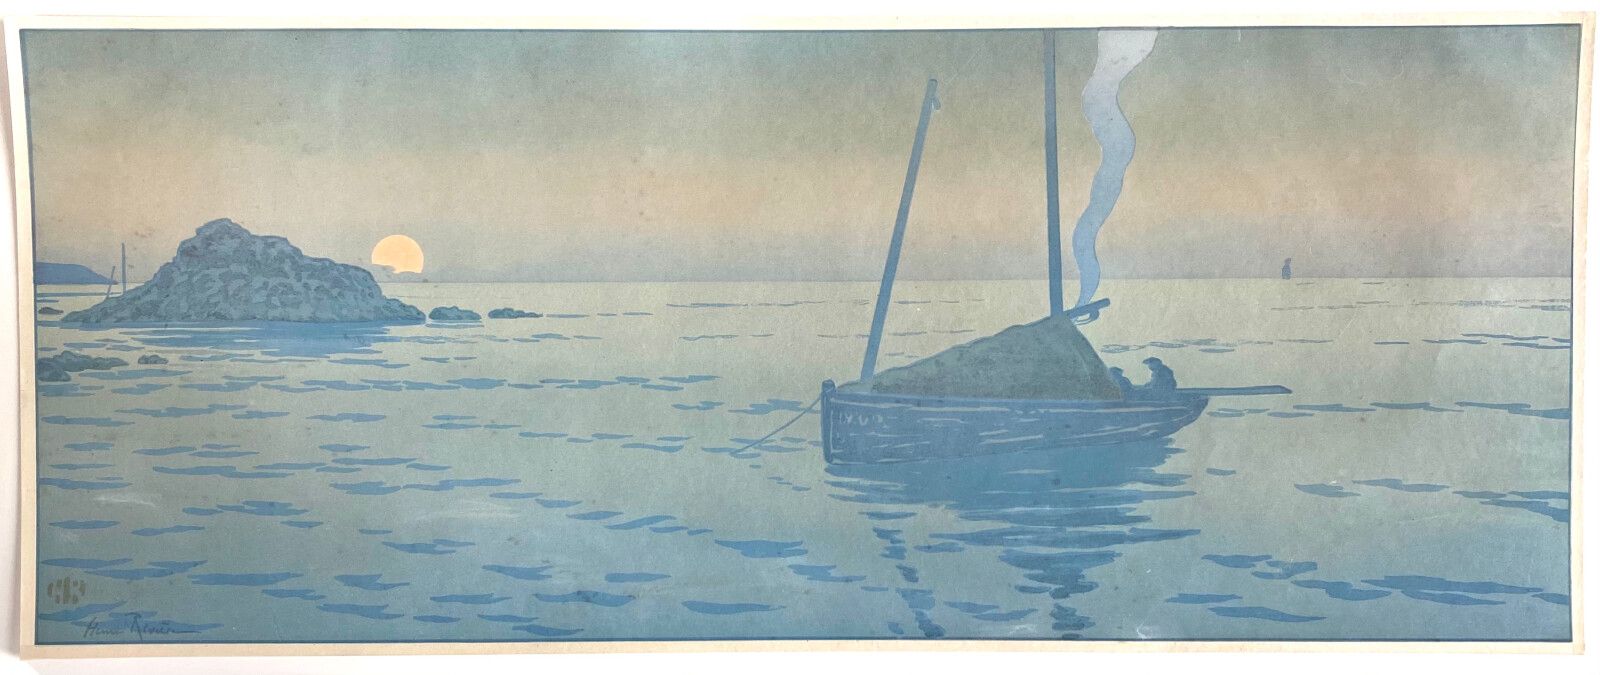 Null Henri RIVIERE (1864-1951)

The setting sun", plate 2, 1901

One of the 16 l&hellip;